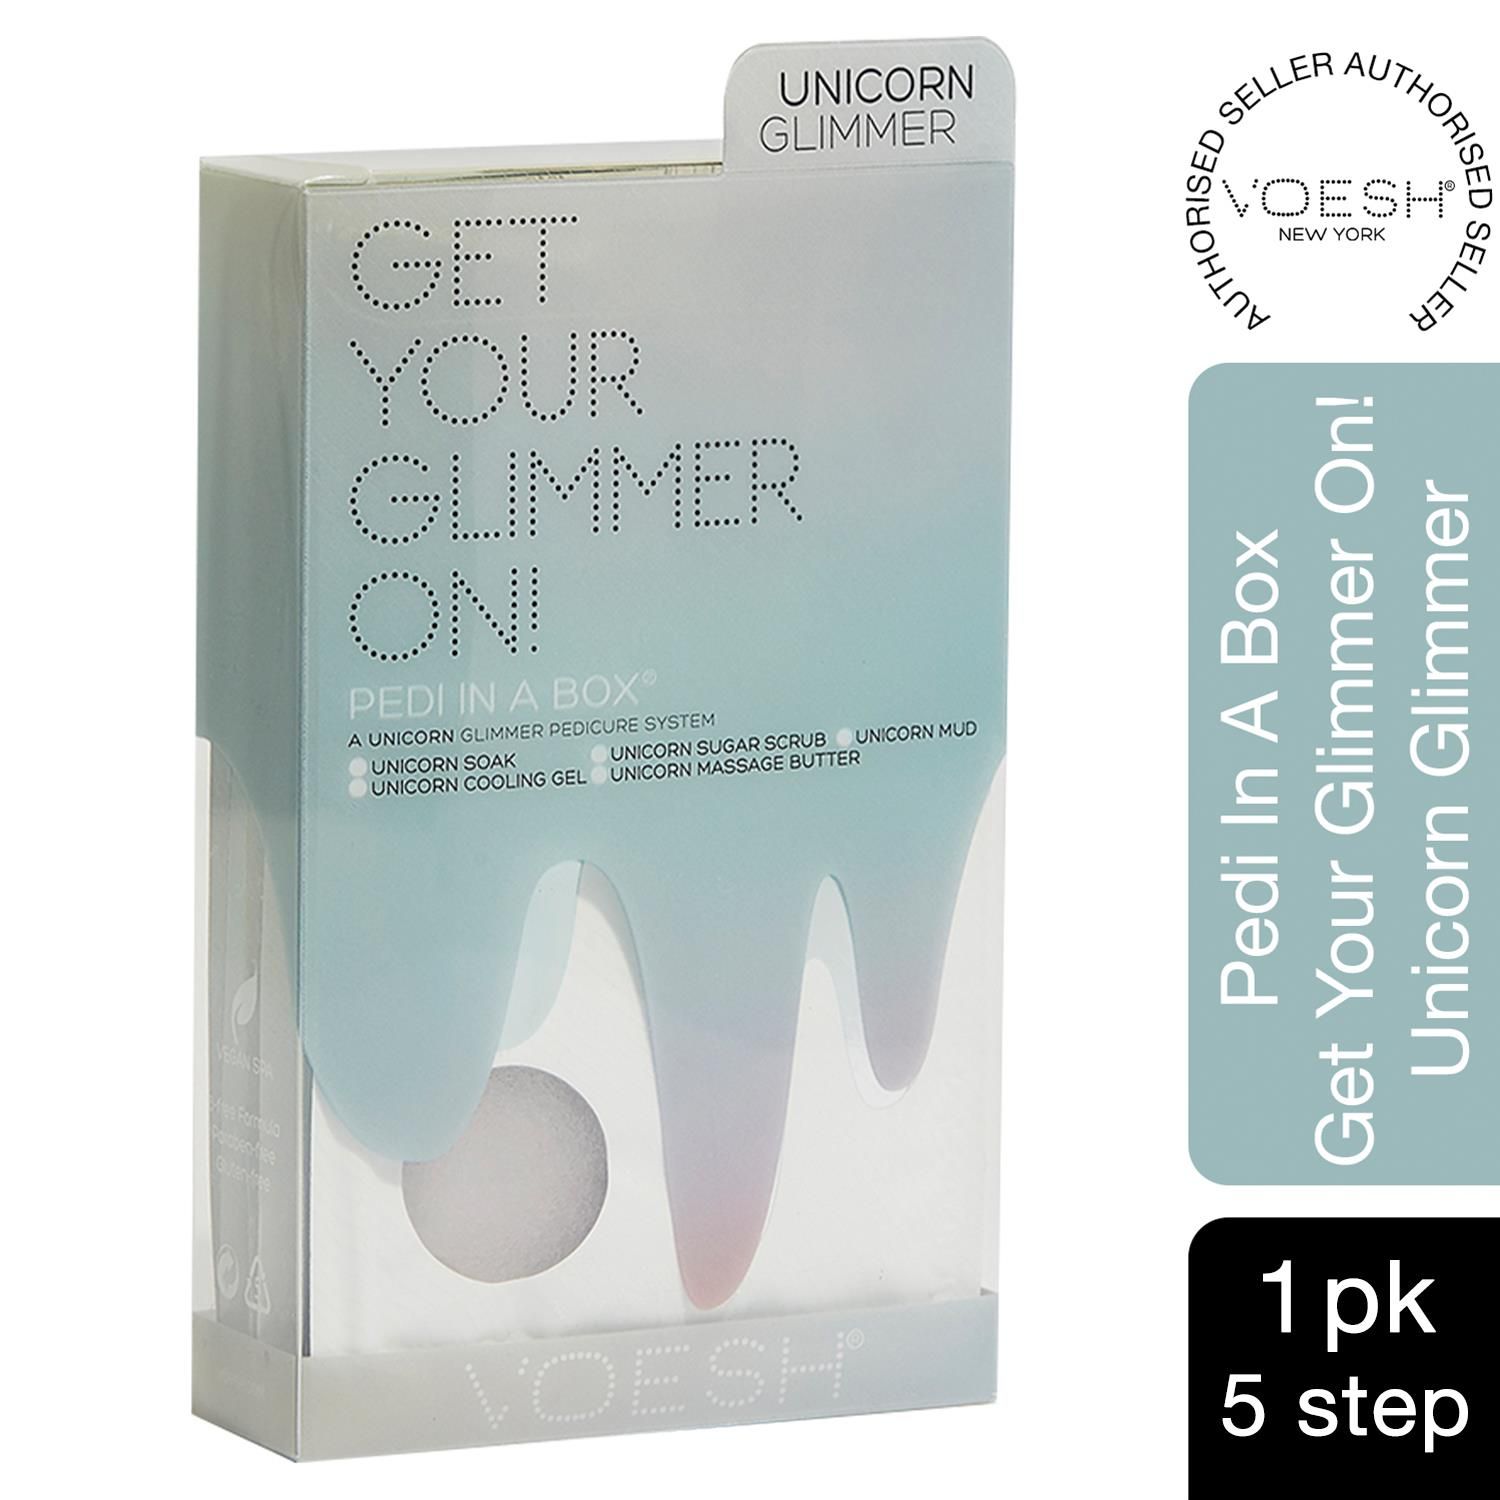 Voesh Get Your Glimmer On 5 Step Unicorn Glimmer Pedi In A Box Glimmer Spa.  Voesh glimmer Pedi in a box is the 5-step single-use pedicure experience. Definitely sparkly A pedicure with a whole lot of shimmers! For a party-ready skin that looks slimmer, brighter and refreshed.For a party-ready skin that looks slimmer, brighter and refreshed. Inspired by the magical mystical Unicorn, with hydrating and softening benefits of Peach. Set includes Unicorn Soak, Unicorn Sugar Scrub, Unicorn Mud, Unicorn Cooling Gel and Unicorn Massage Butter.  Made With Vanilla Bean Extract. 

The Perfect Pedi For:
DIY At-Home Pedicure
Date Night
Bachelorette Parties
Girls’ Night In

This kit contains:
Sea Salt Soak 35g: This soak helps relieve tension, stiffness, minor aches and discomfort in your feet. It helps detox and deodorize the feet.
Sugar Scrub 35g: The scrub gently exfoliates dead skin cells and helps soften your feet. Perfect for use on the soles on your feet.
Mud Masque 35g: The masque removes deep-seated impurities in your skin leaving your feet feeling clean and revived.
Cooling Gel Mask 35g: This gel-based mask helps cool and soothe your feet. It is packed with gold shimmer for a touch of luxury.
Massage Cream 35g: The massage cream hydrates and soothes skin. It softens the soles of your feet and helps prevent dryness and roughness.